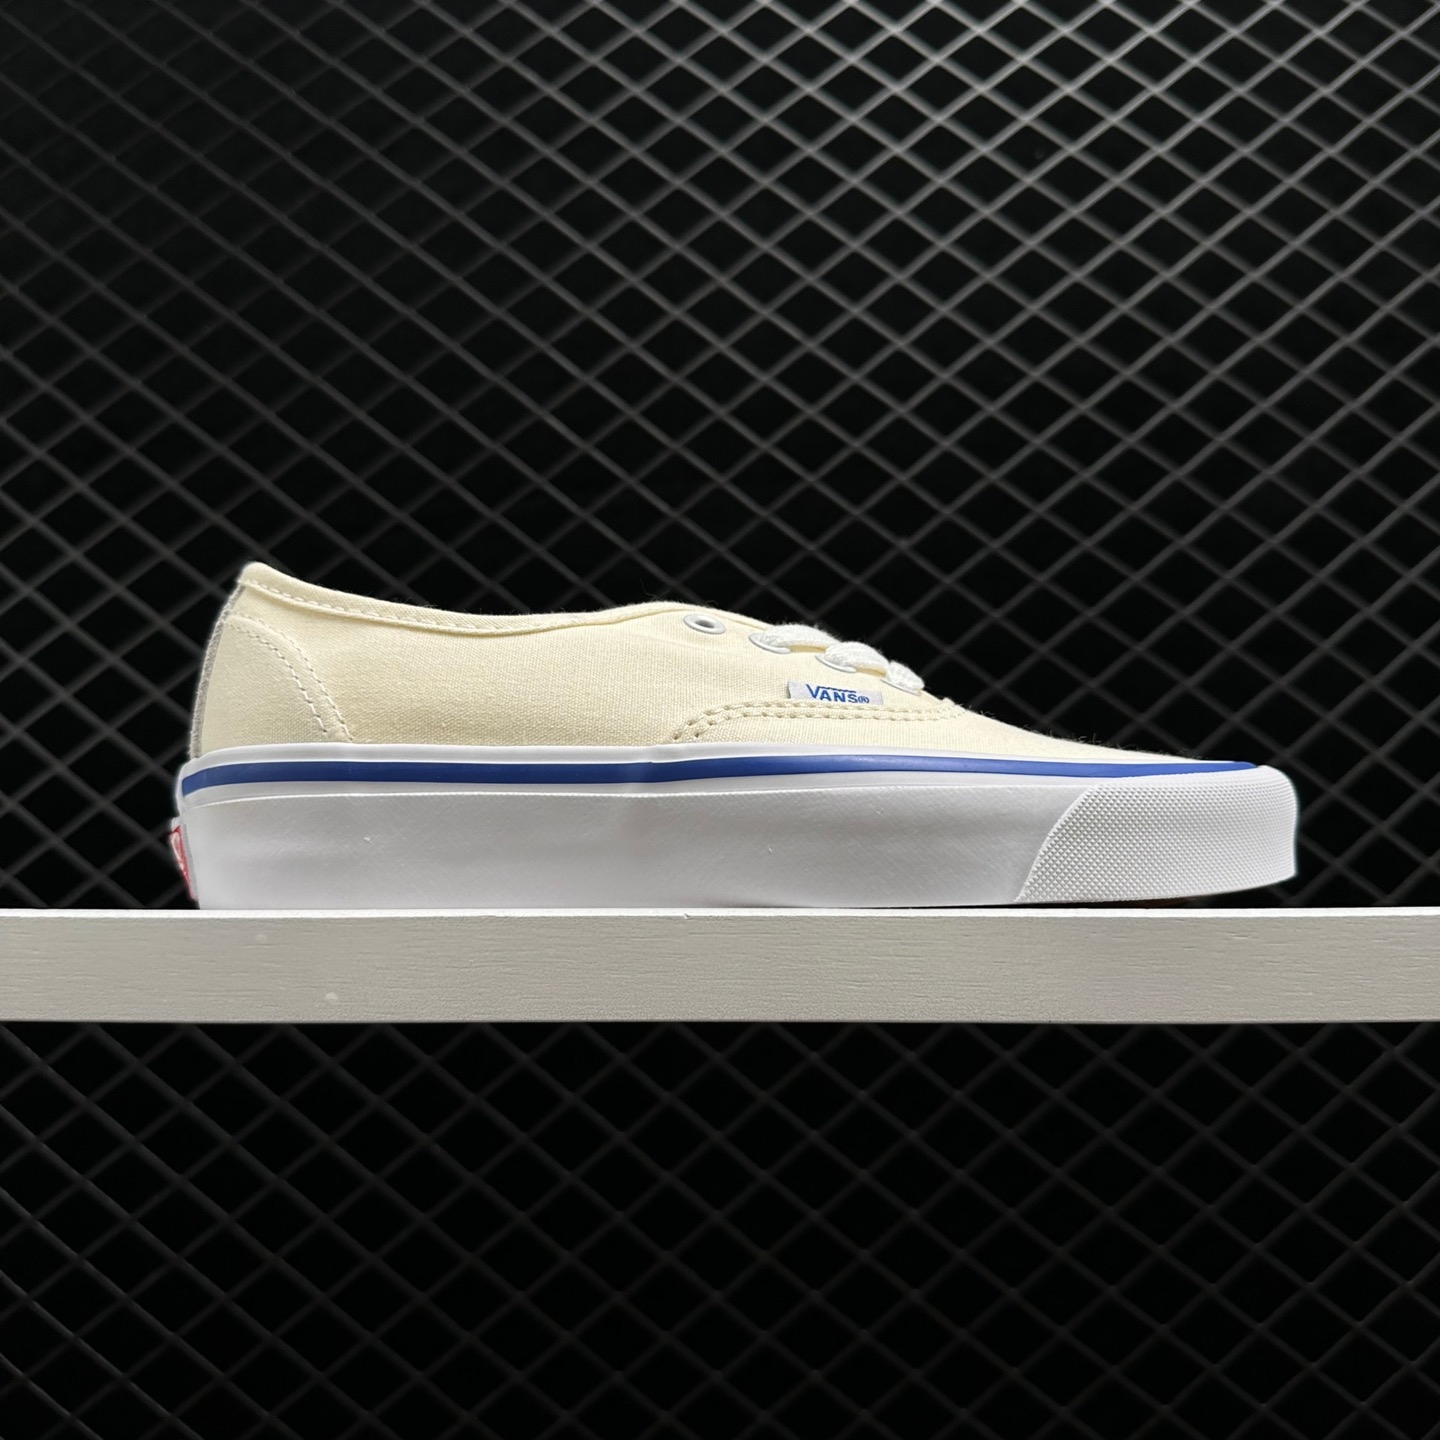 Vans Authentic White VN000EE3WHT - Classic Style Sneakers at Affordable Prices